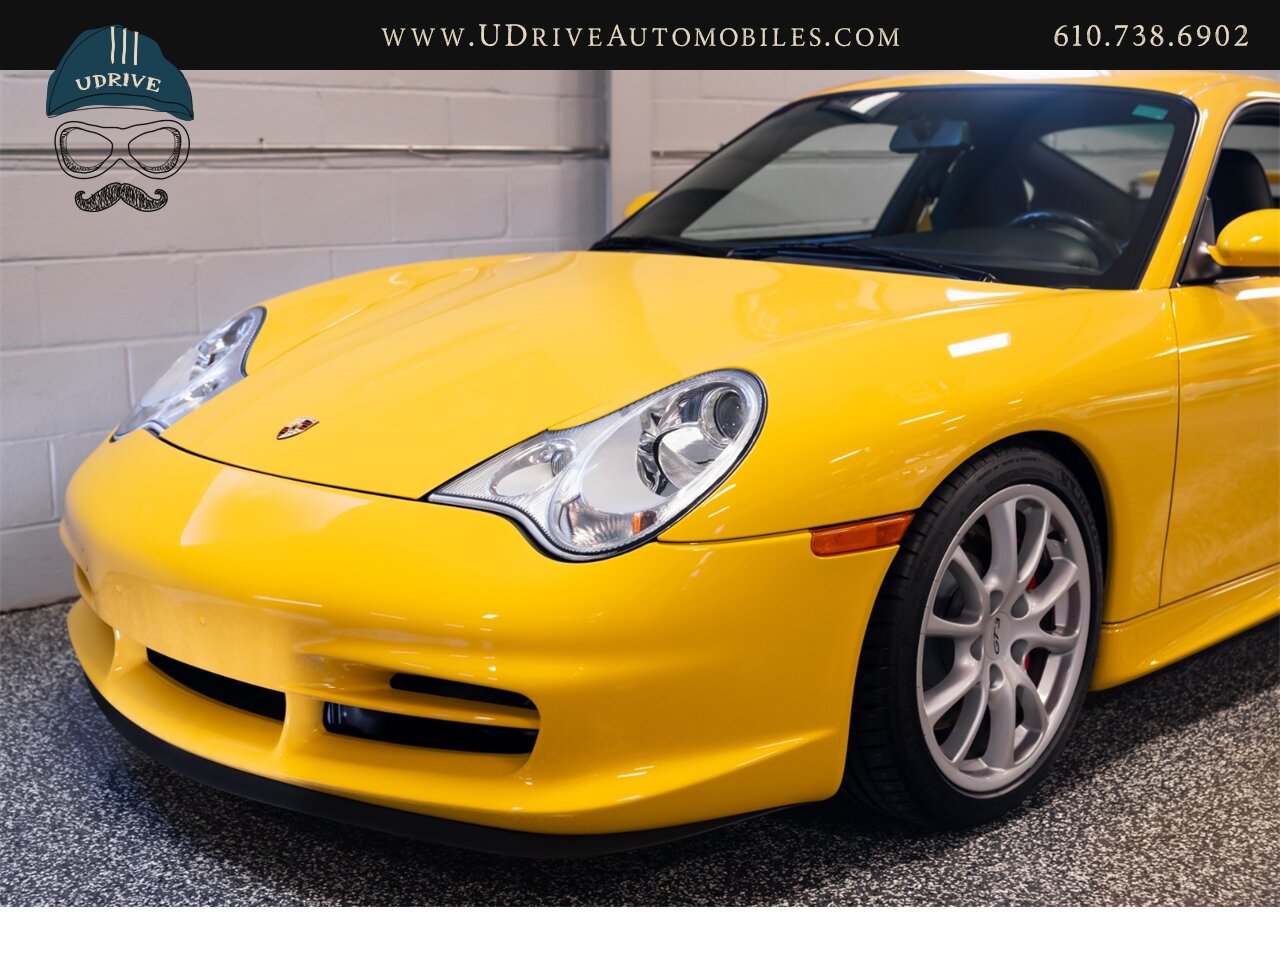 2005 Porsche 911 GT3 996 Speed Yellow Sport Seats Pntd Hardbacks  Pntd Console Deviating Stitch Yellow Accents Throughout - Photo 11 - West Chester, PA 19382